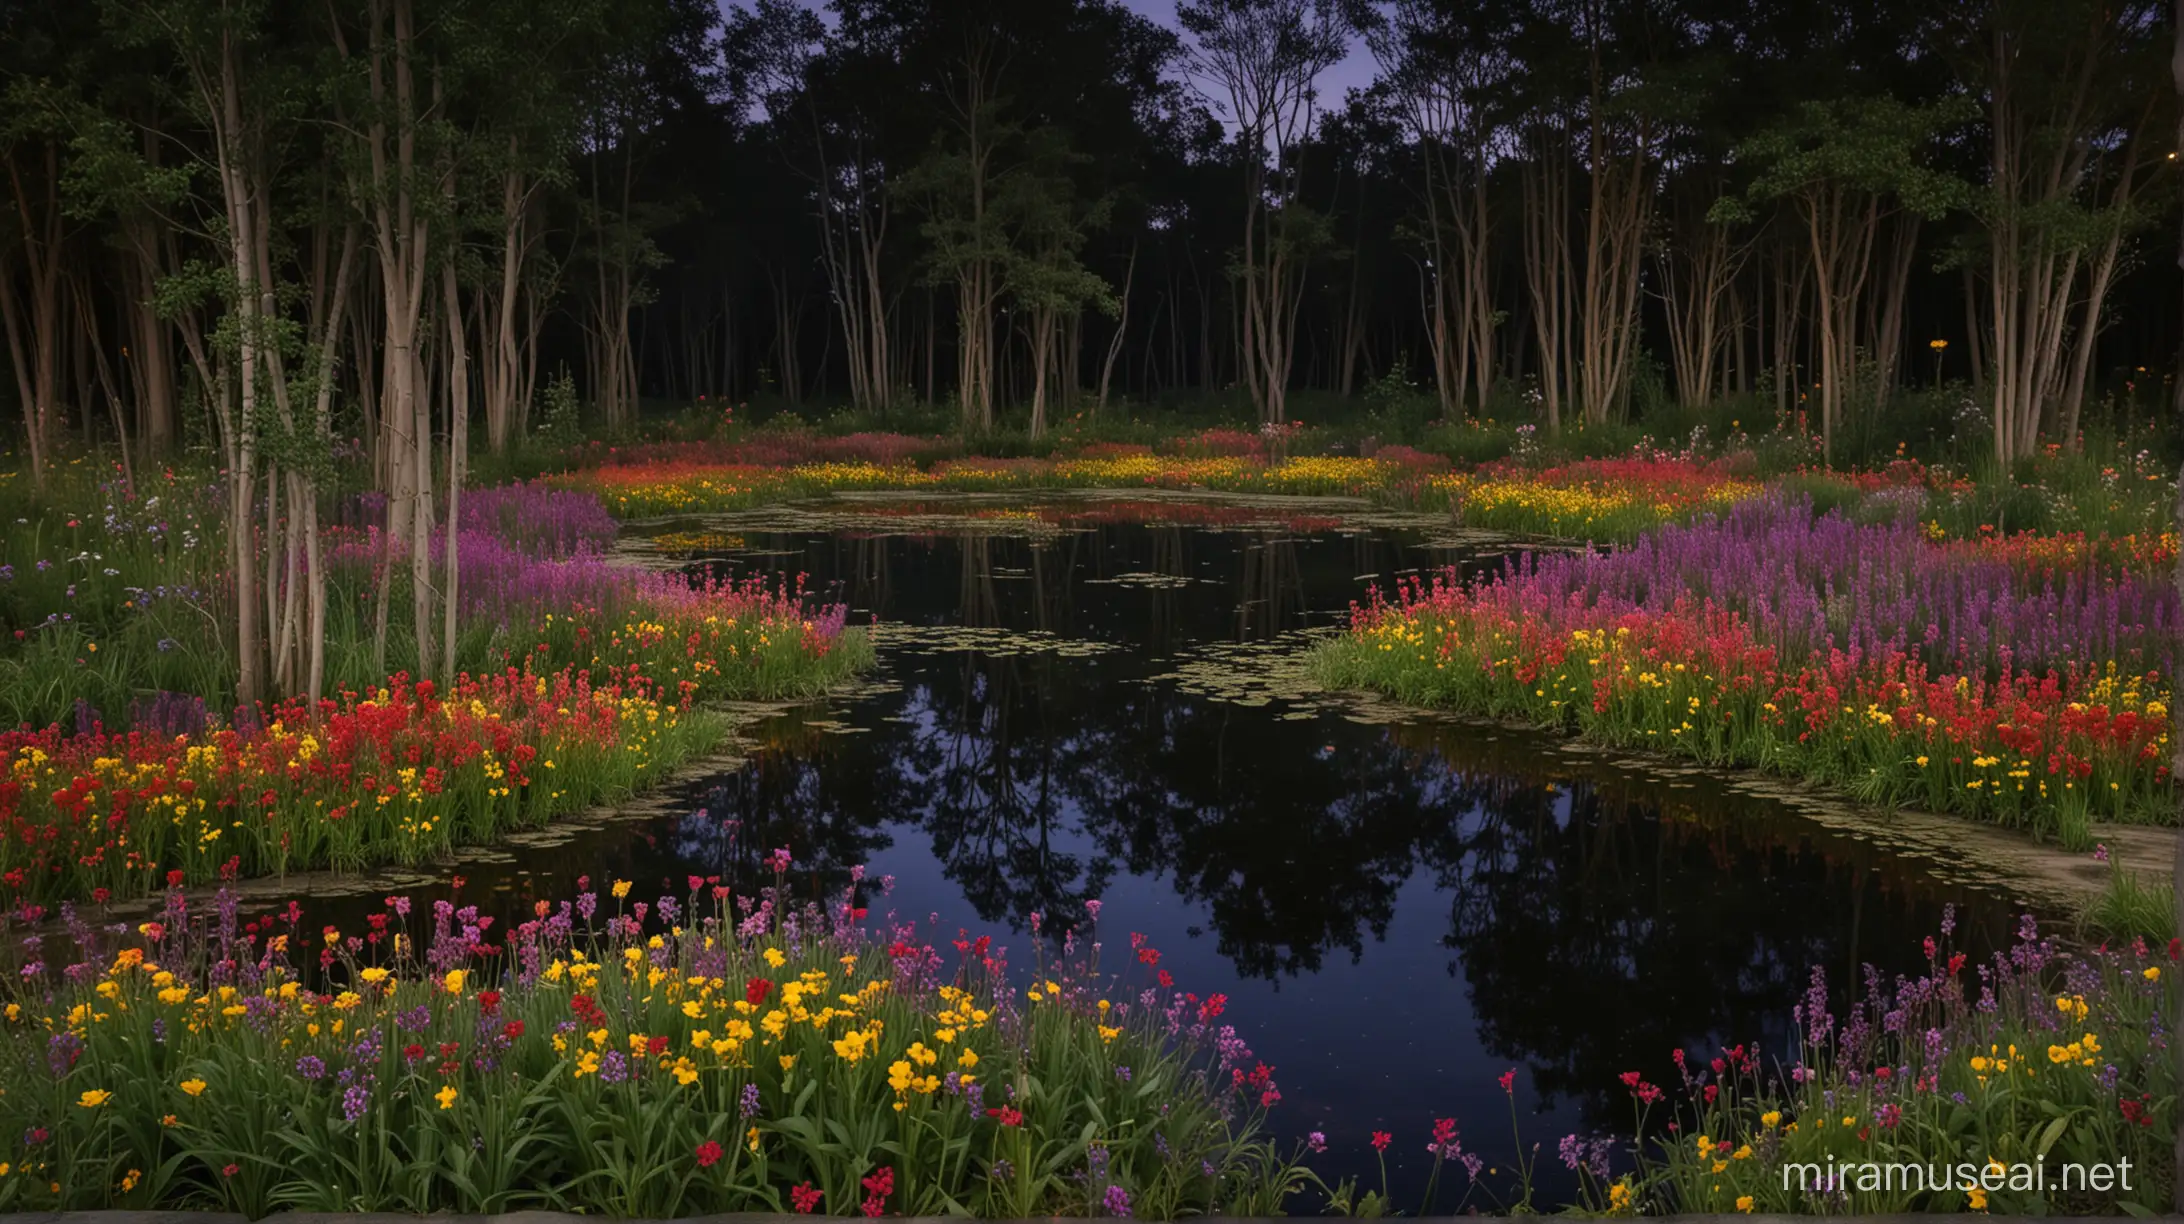 Tranquil Nighttime Pond Surrounded by Colorful Flowers in Grove